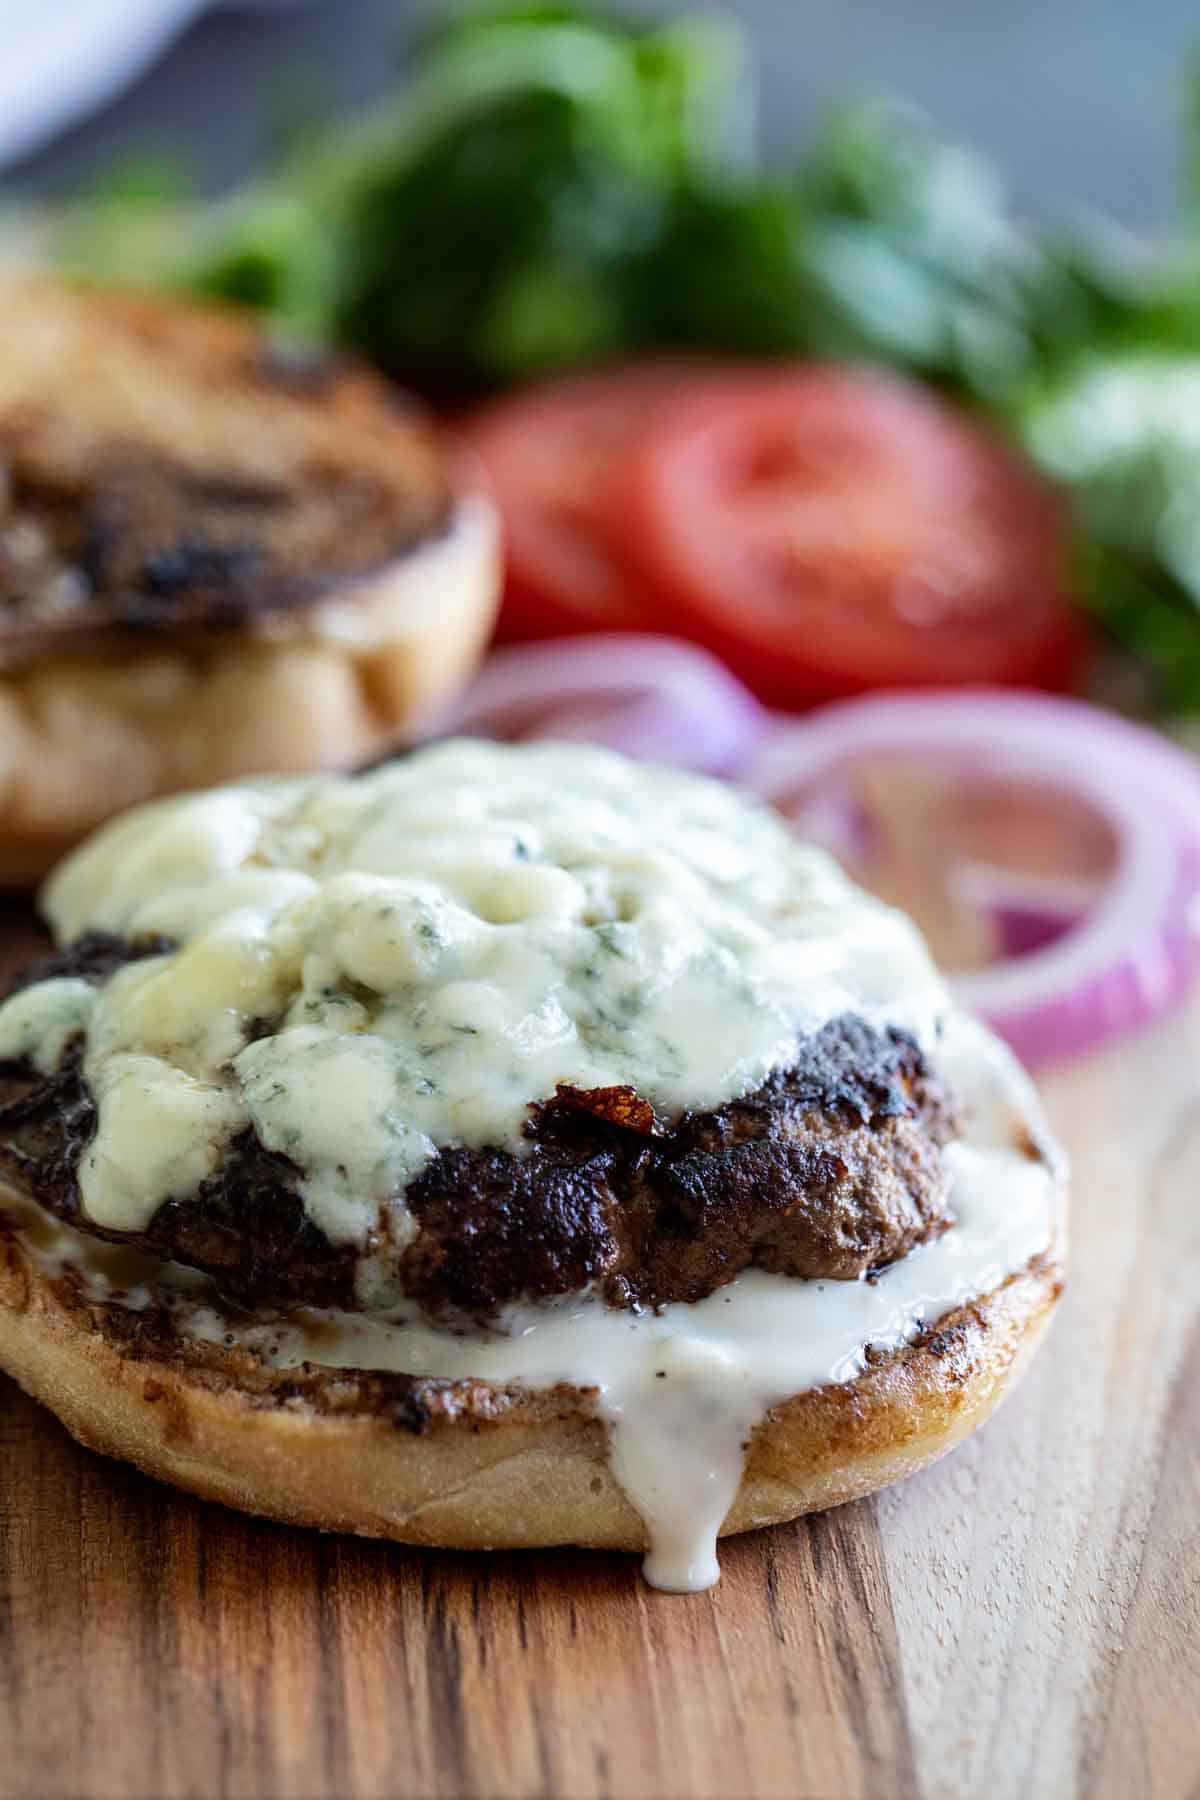 Burger topped with blue cheese and blue cheese dressing